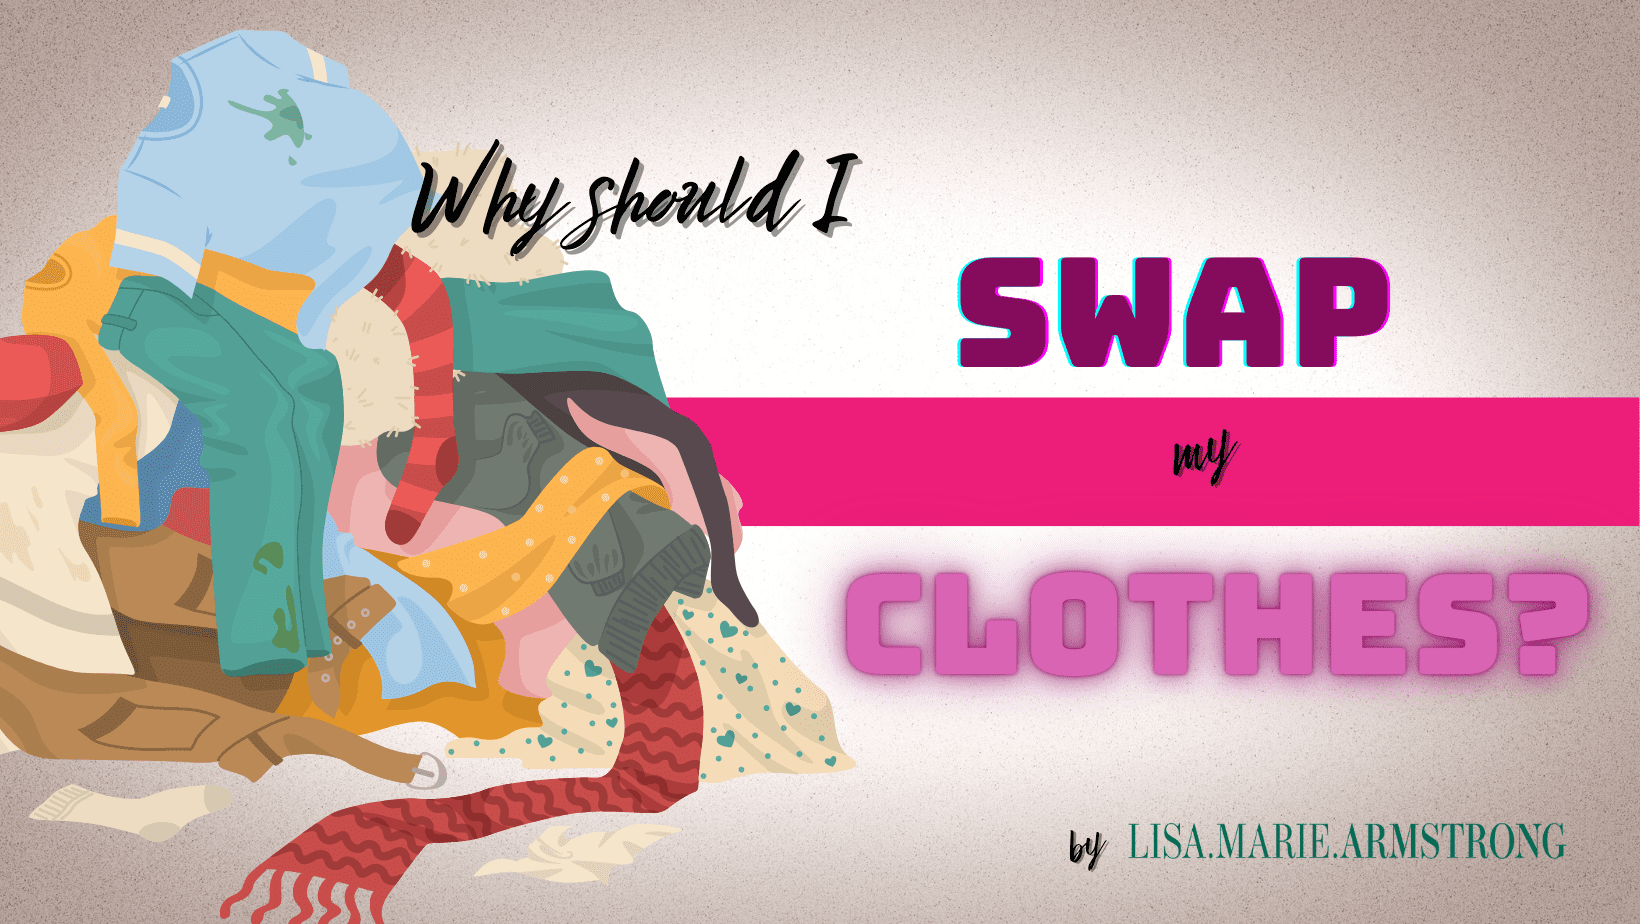 Blog post: Swapping Clothes